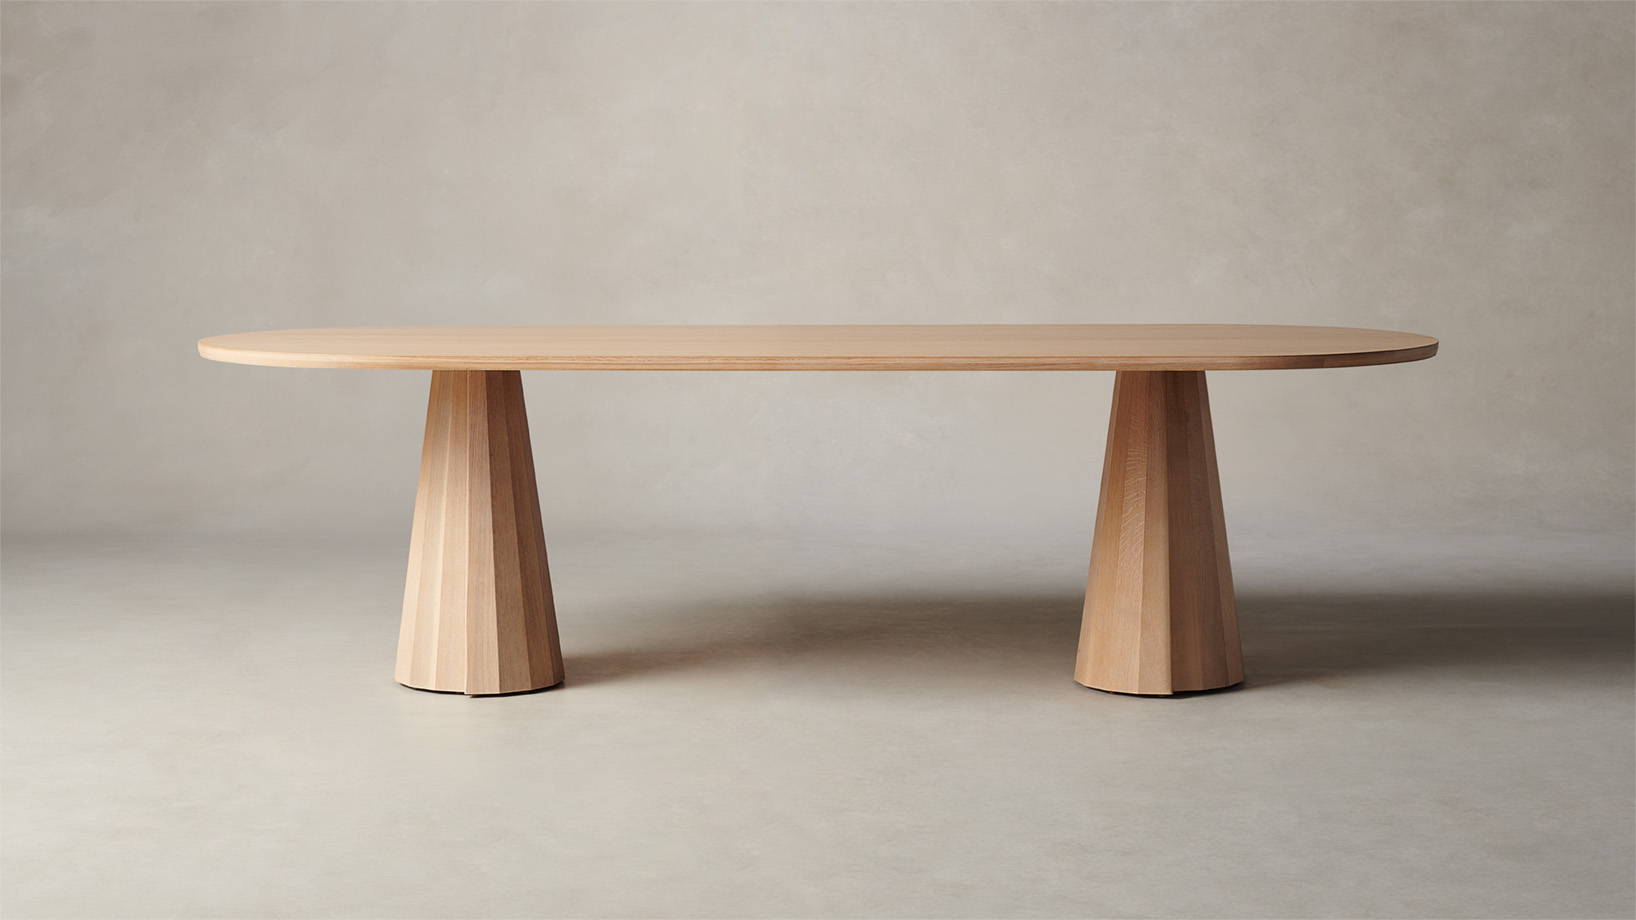 The Bank Oval Dining Table